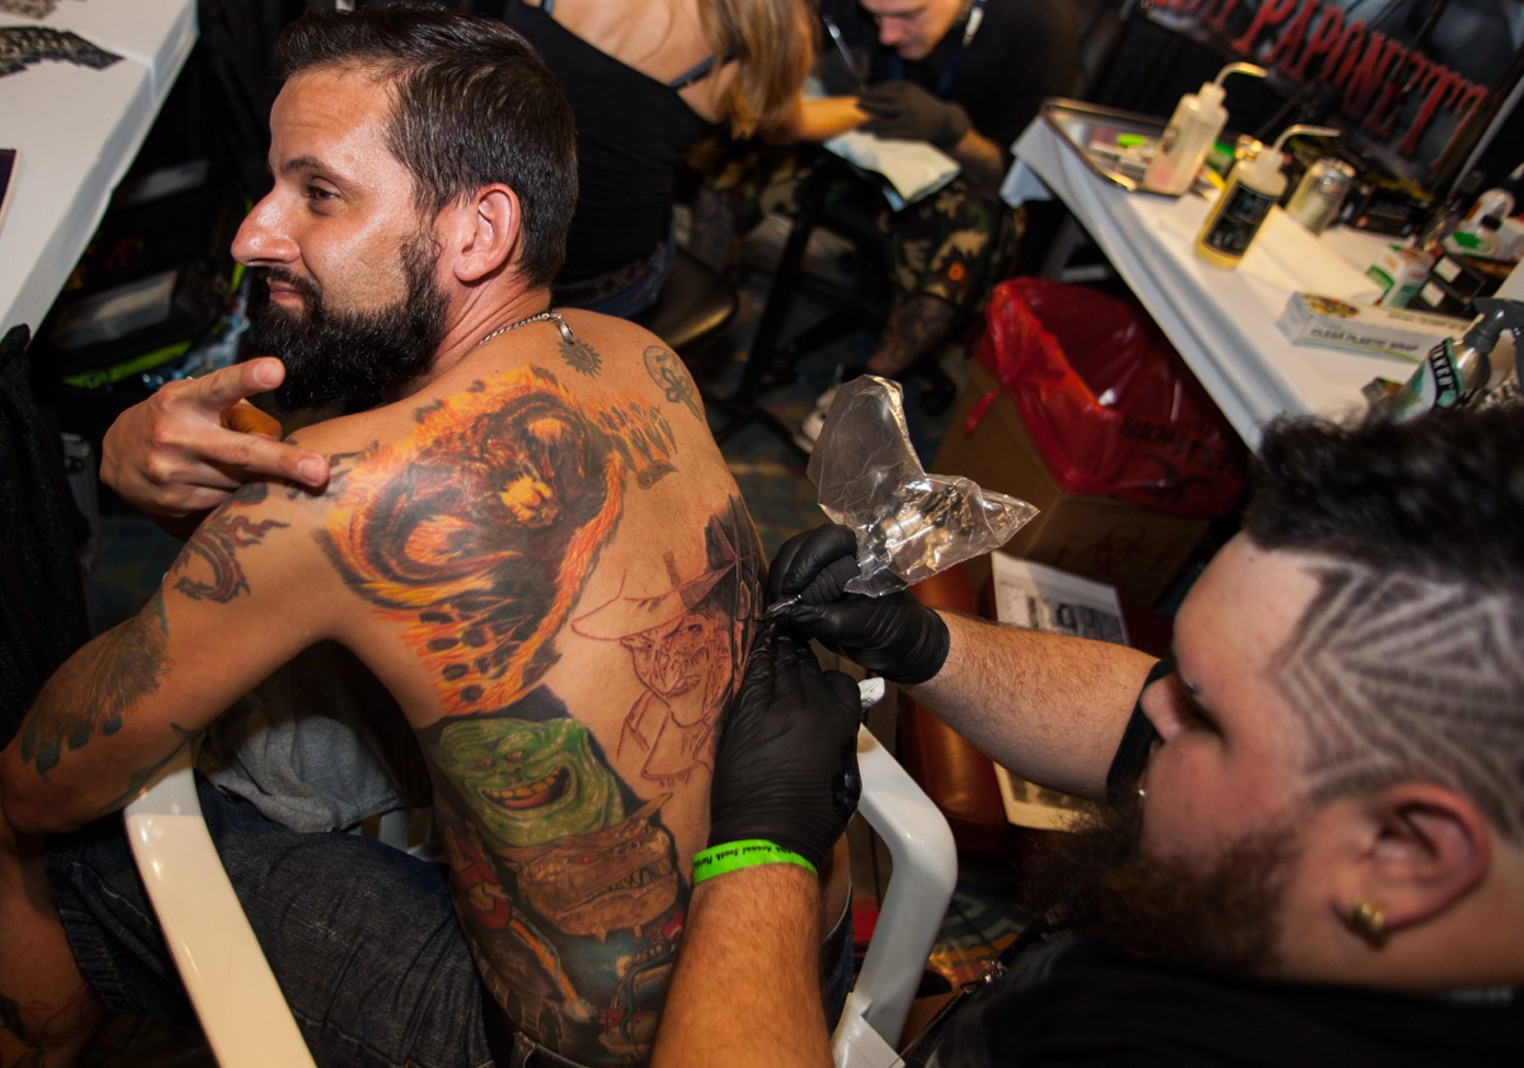 The Best and Weirdest Tattoos From the 2017 South Florida Tattoo Expo   Miami  Miami New Times  The Leading Independent News Source in Miami  Florida